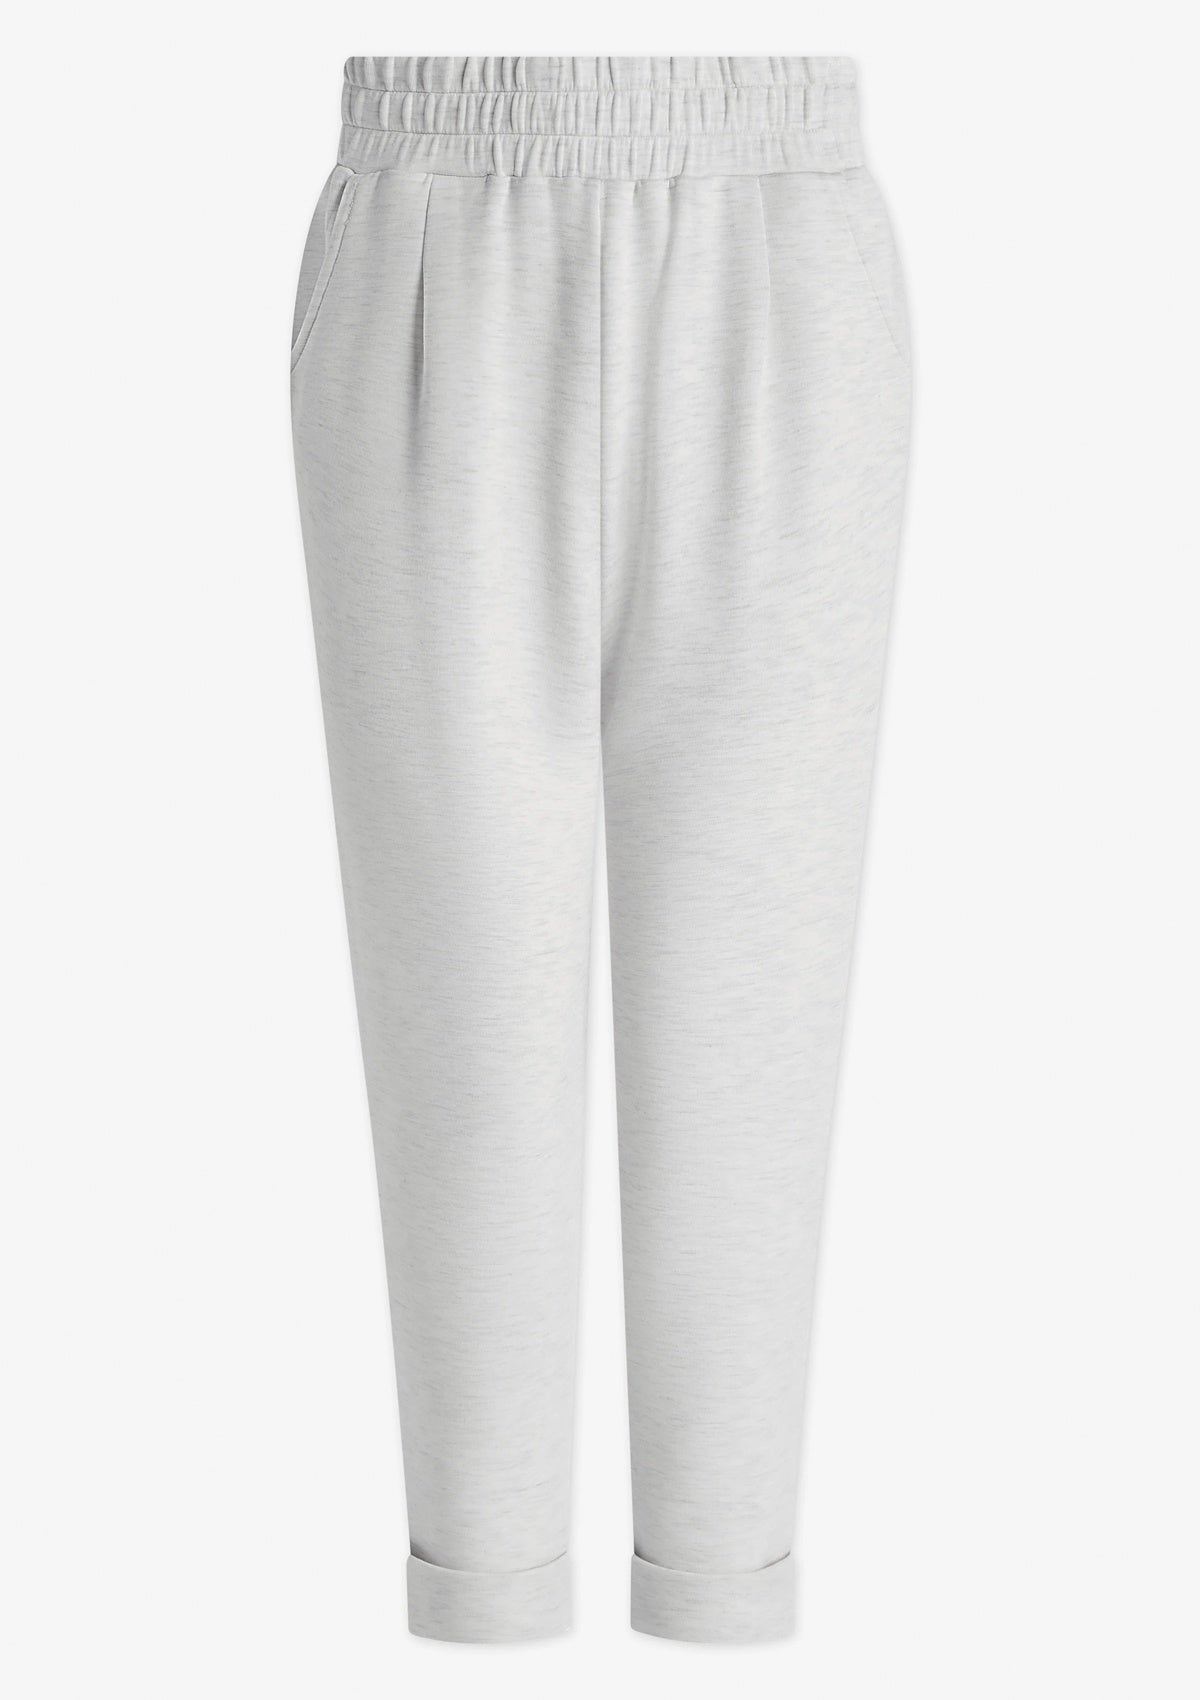 Varley Rolled Cuff Pant 25 Ivory Marl